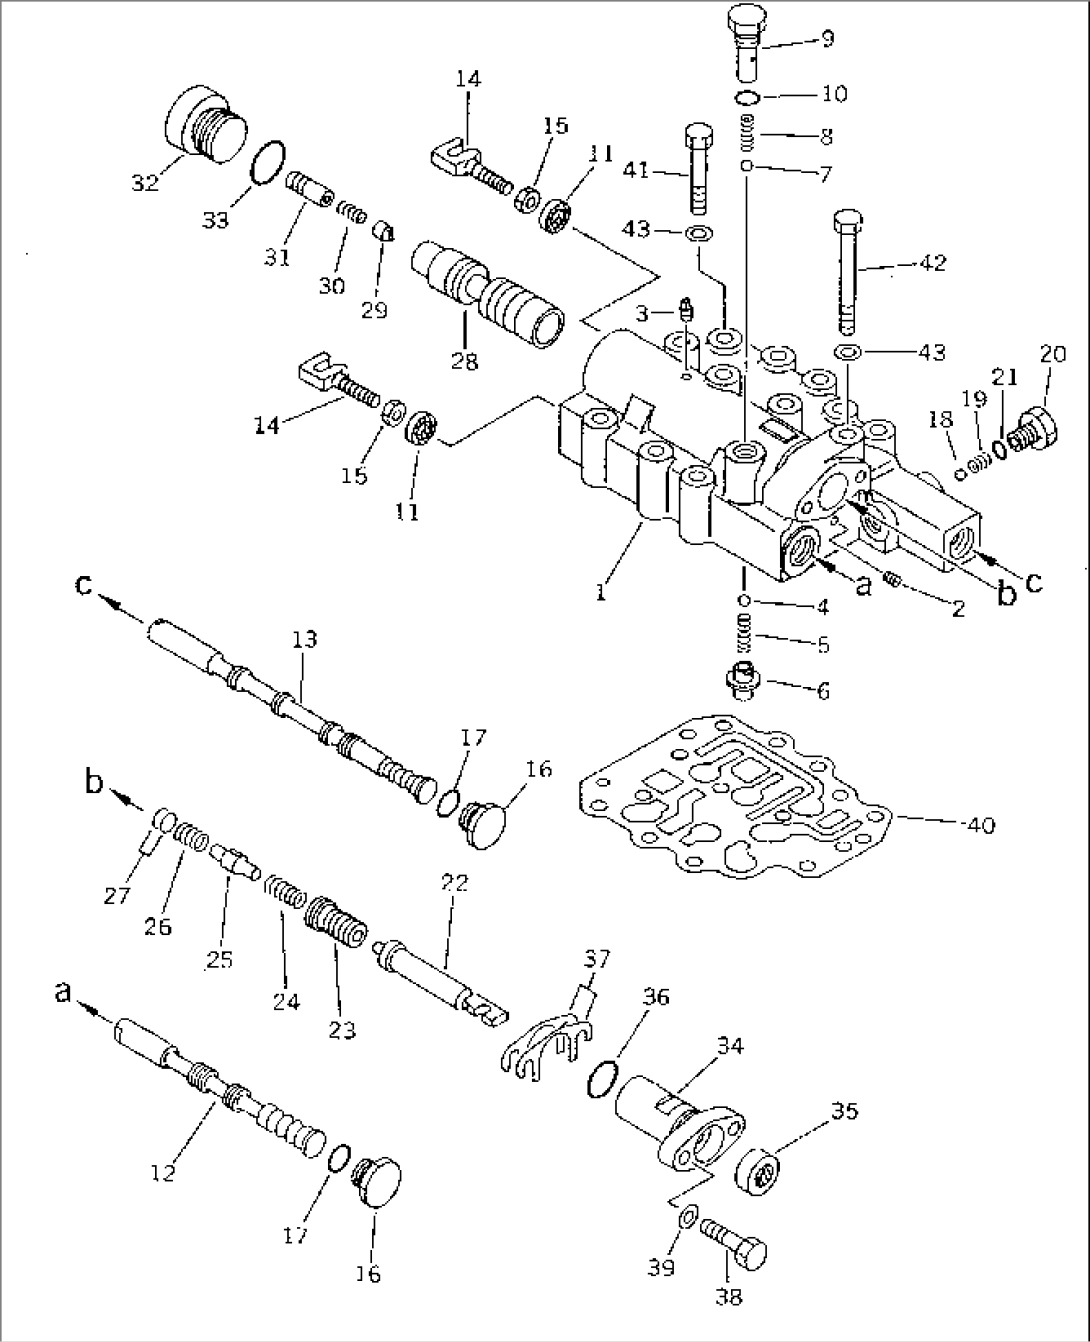 TRANSMISSION VALVE (F2-R2) (SELECTOR AND INCHING) (FOR MONO LEVER STEERING)